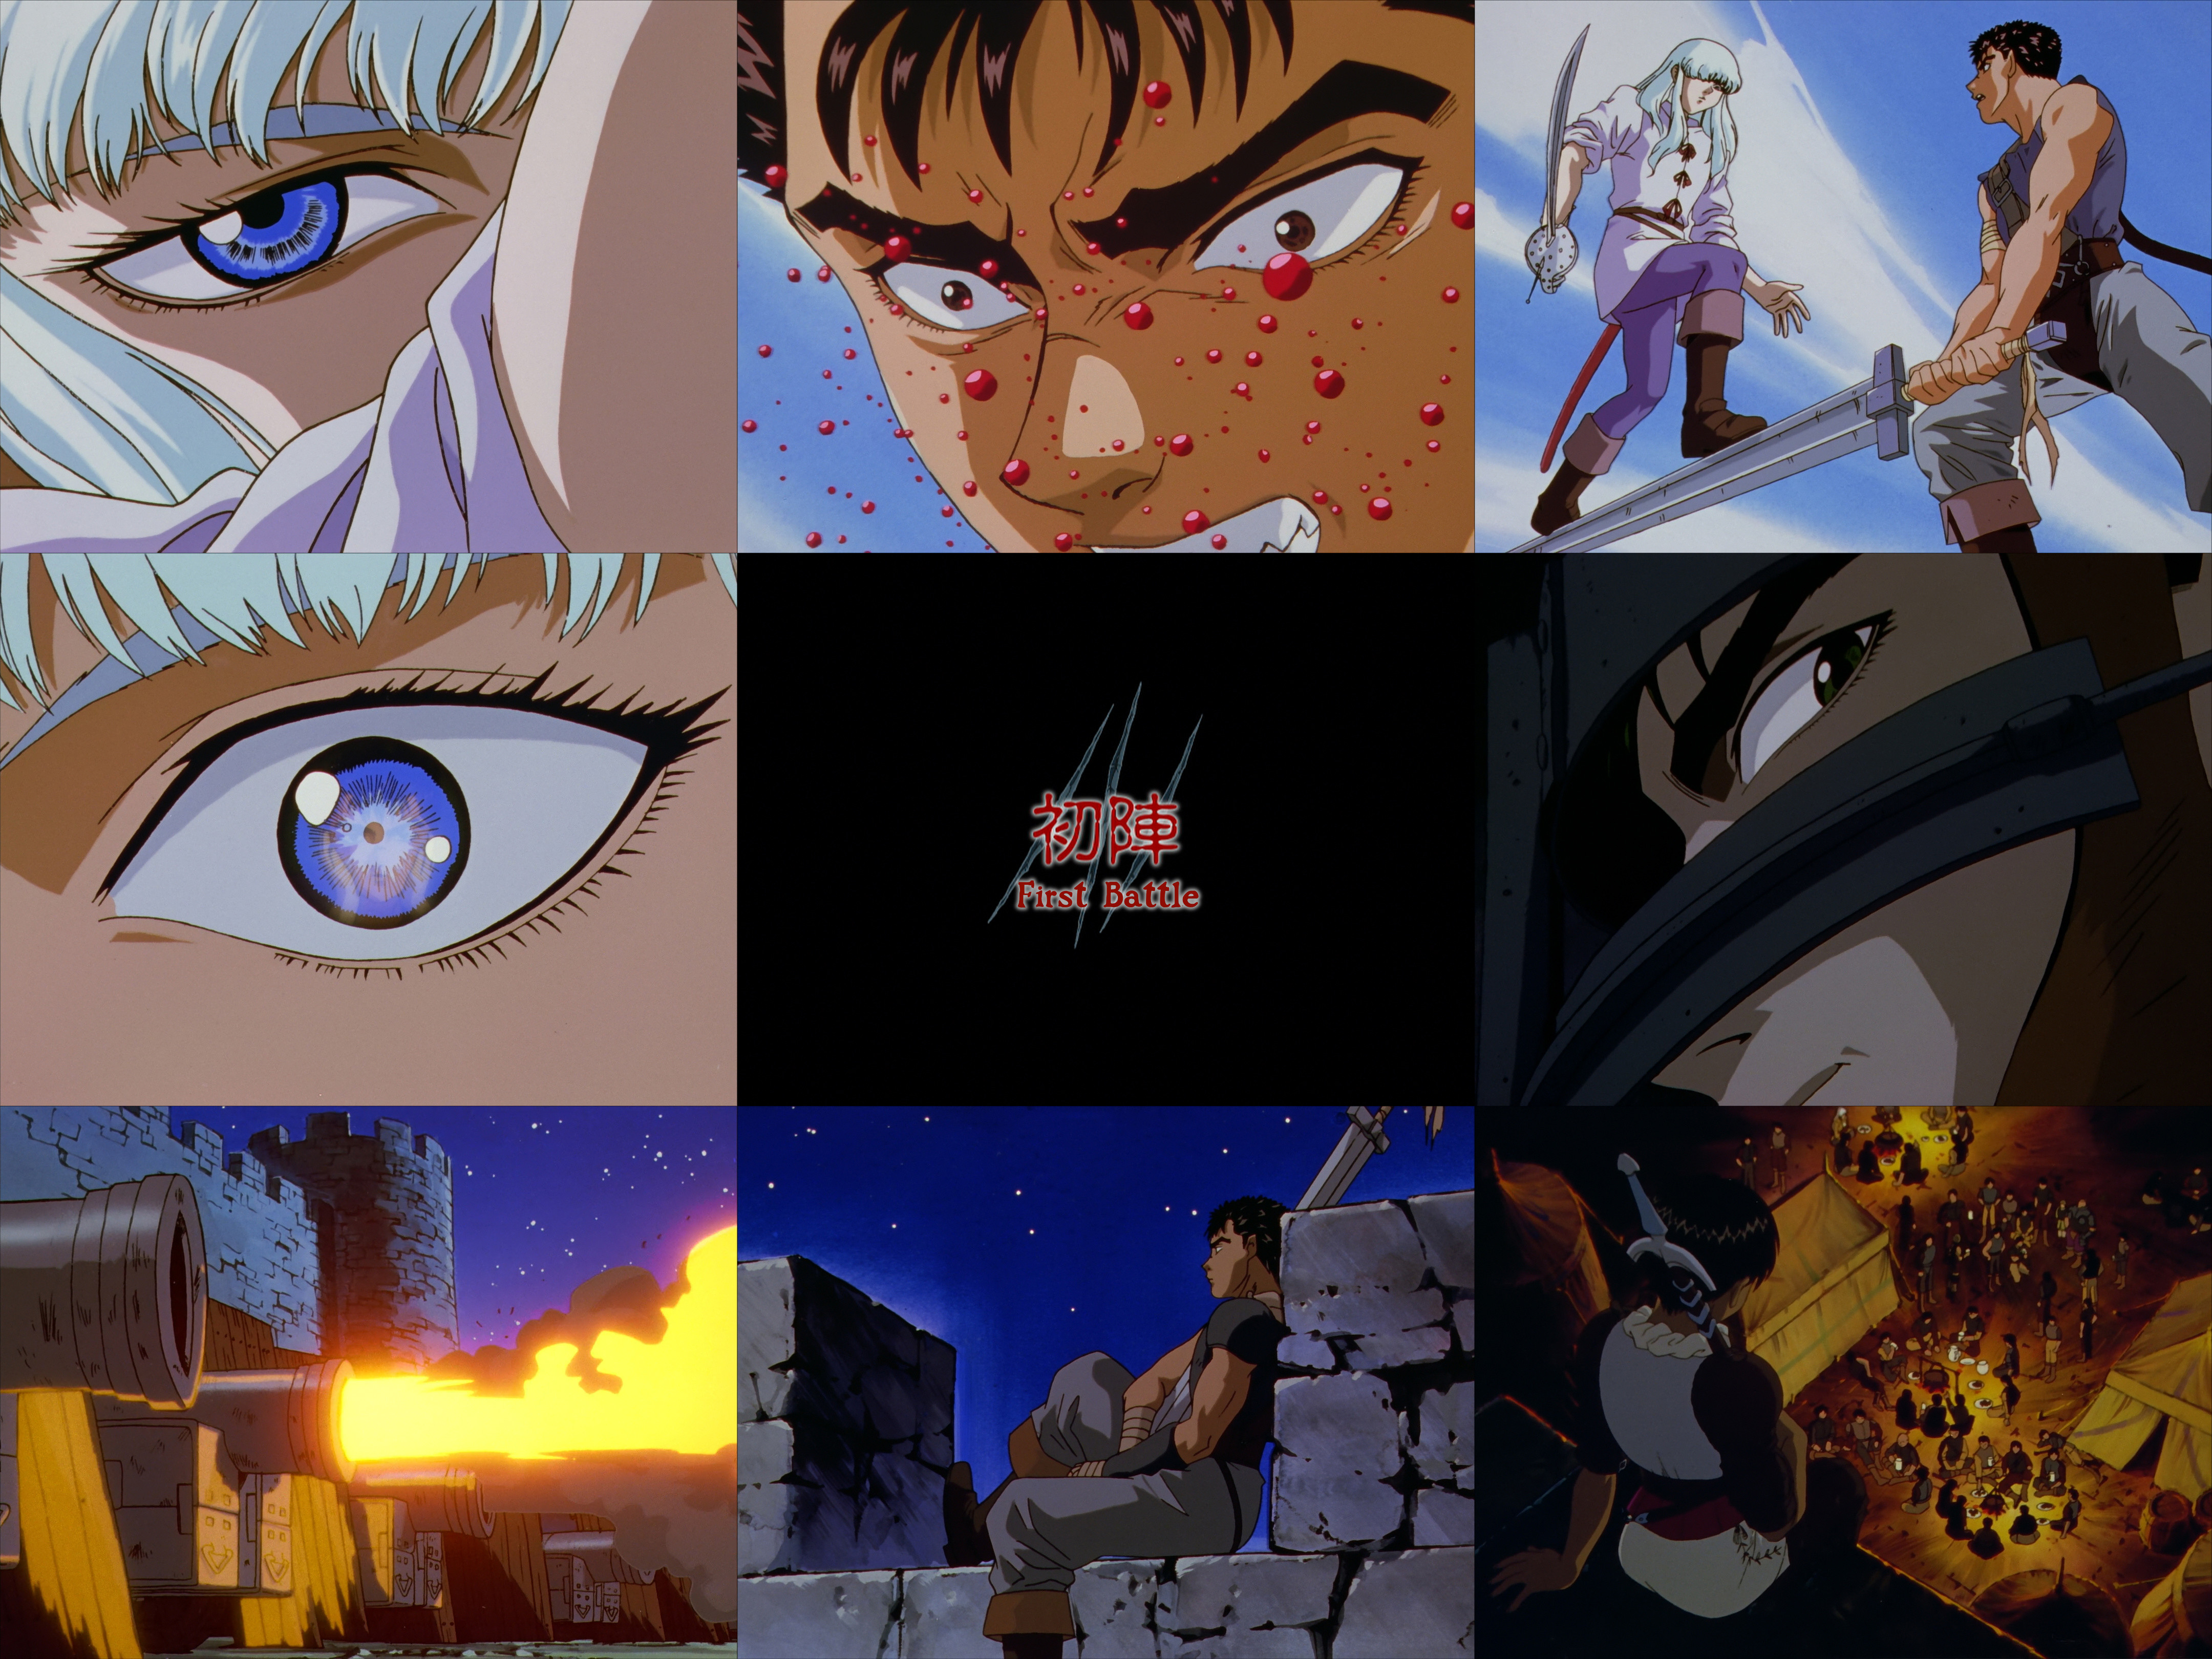 It isn't hard to see why most if not all Berserk fans hold the '97 anime in  high regard. Episode 12 is a good example of why, and one of my favorites